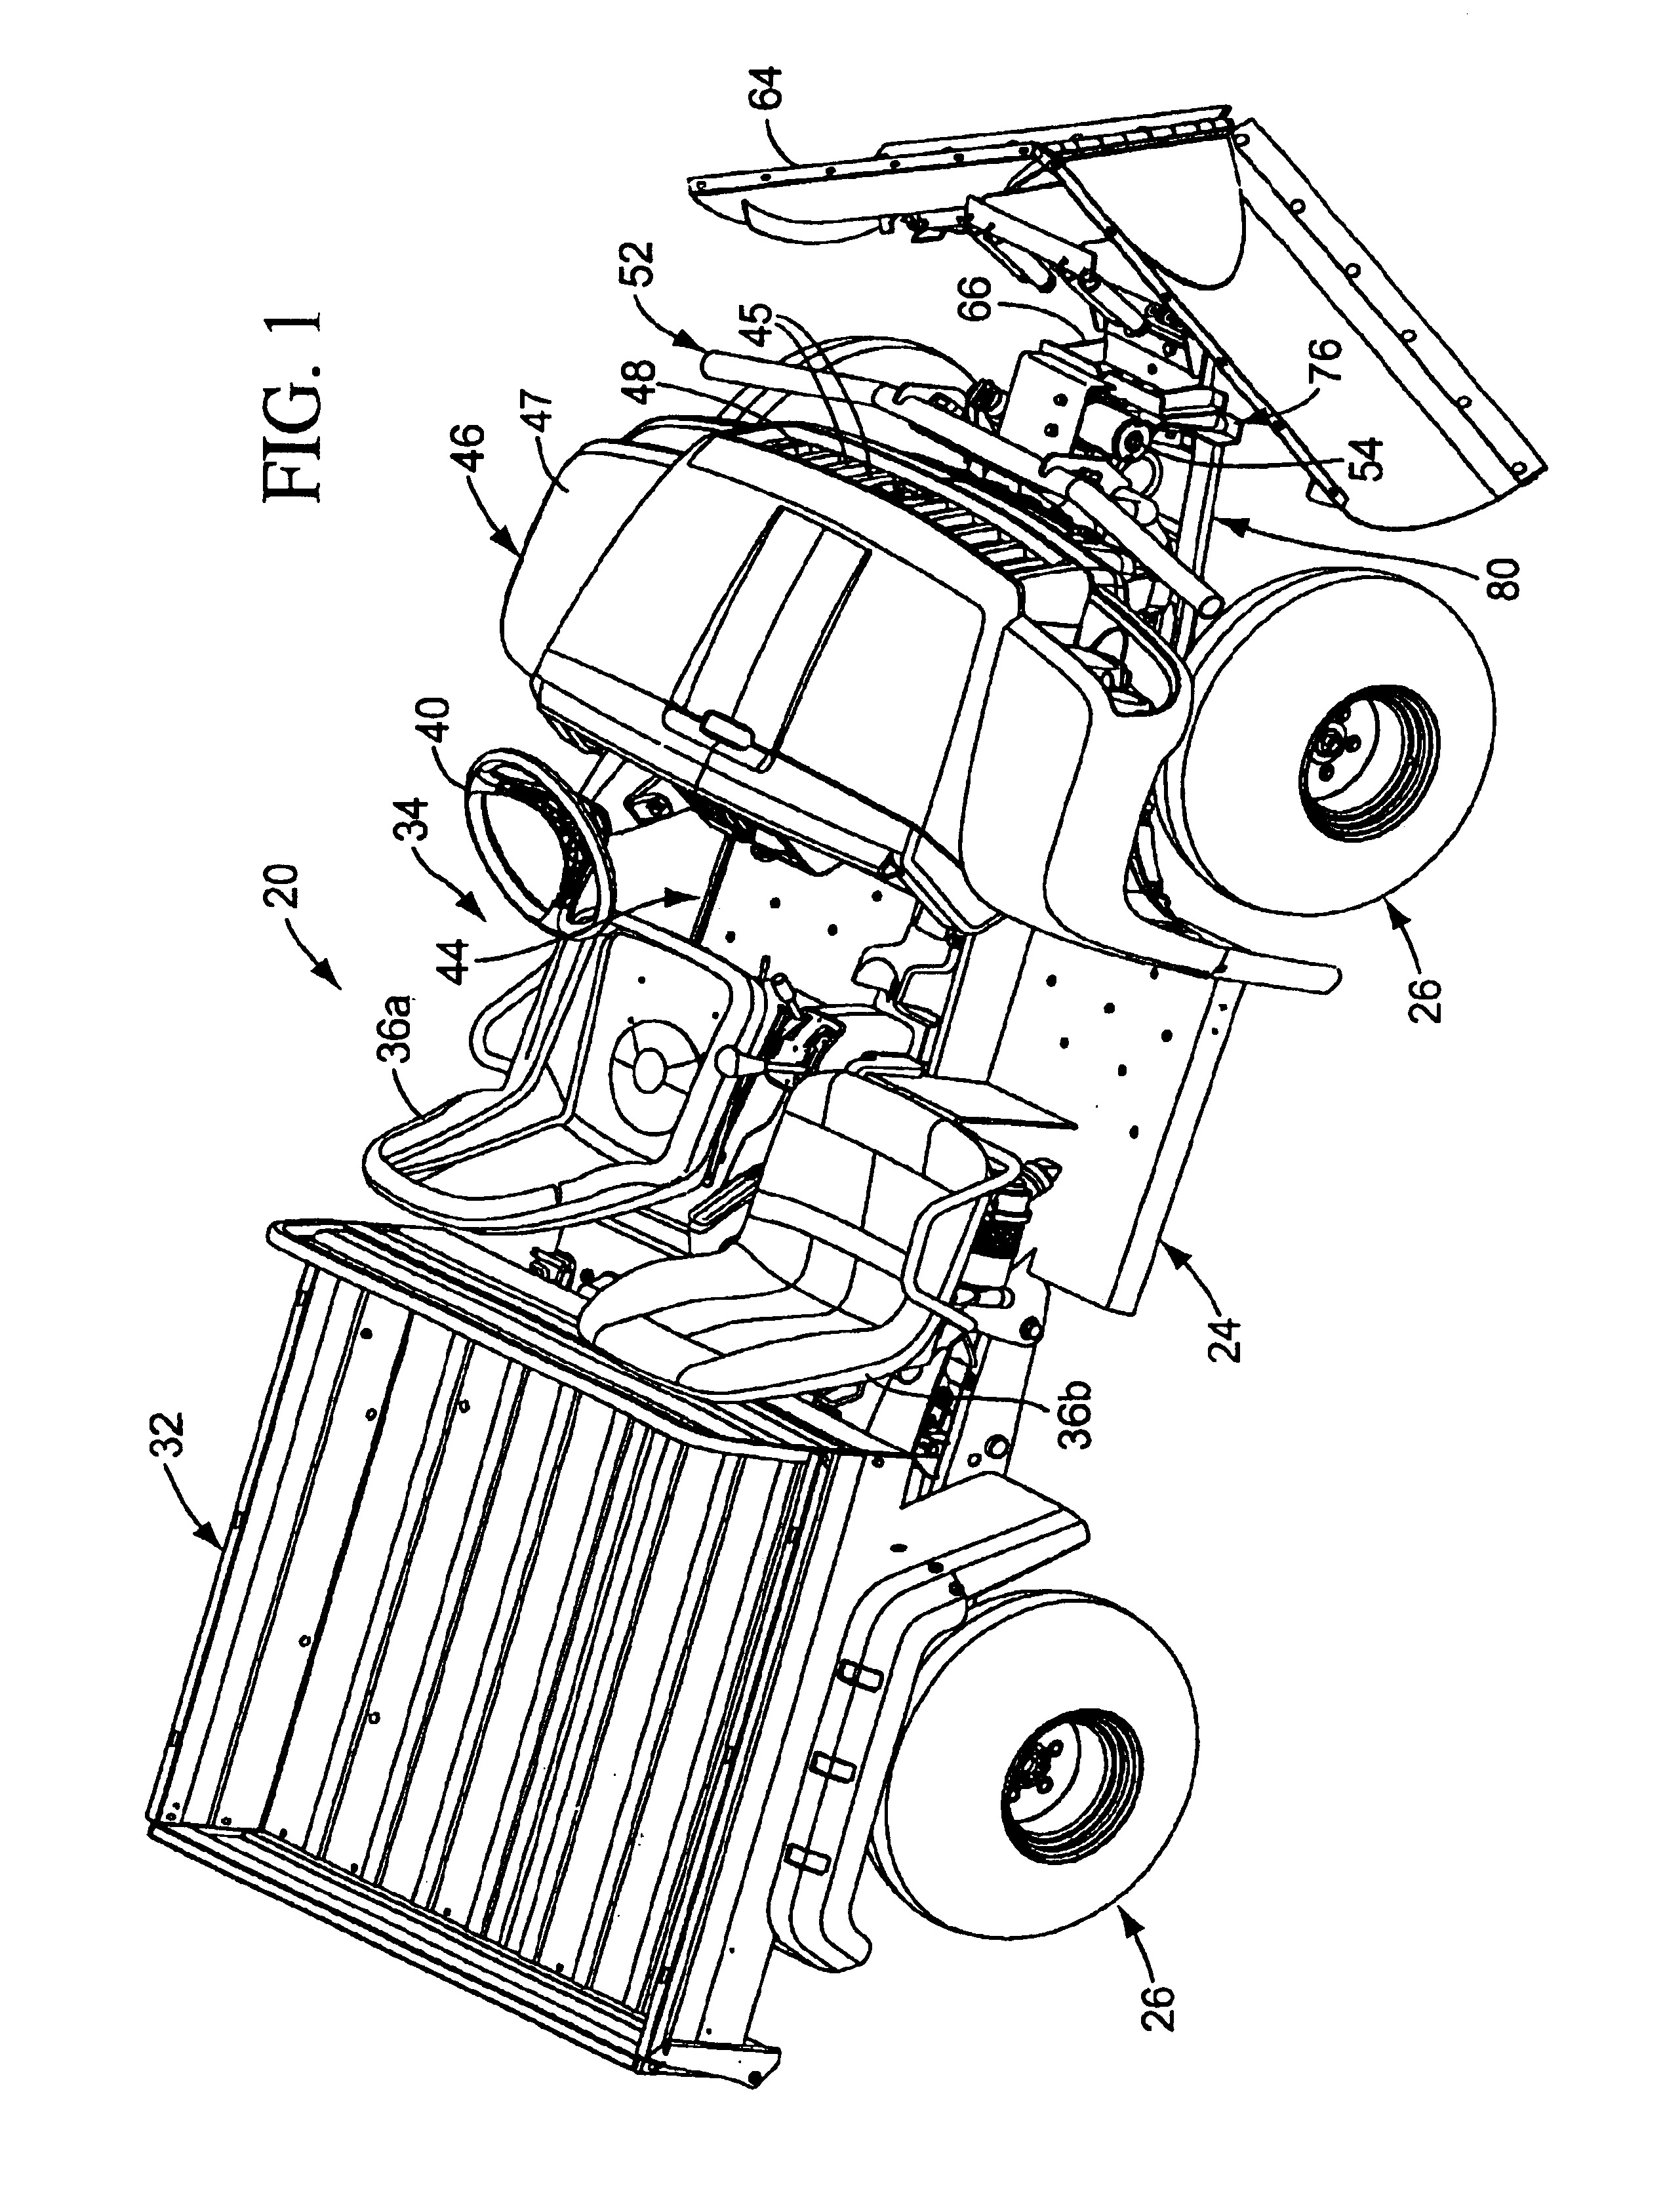 Bumper, skid plate and attachment system for utility vehicle